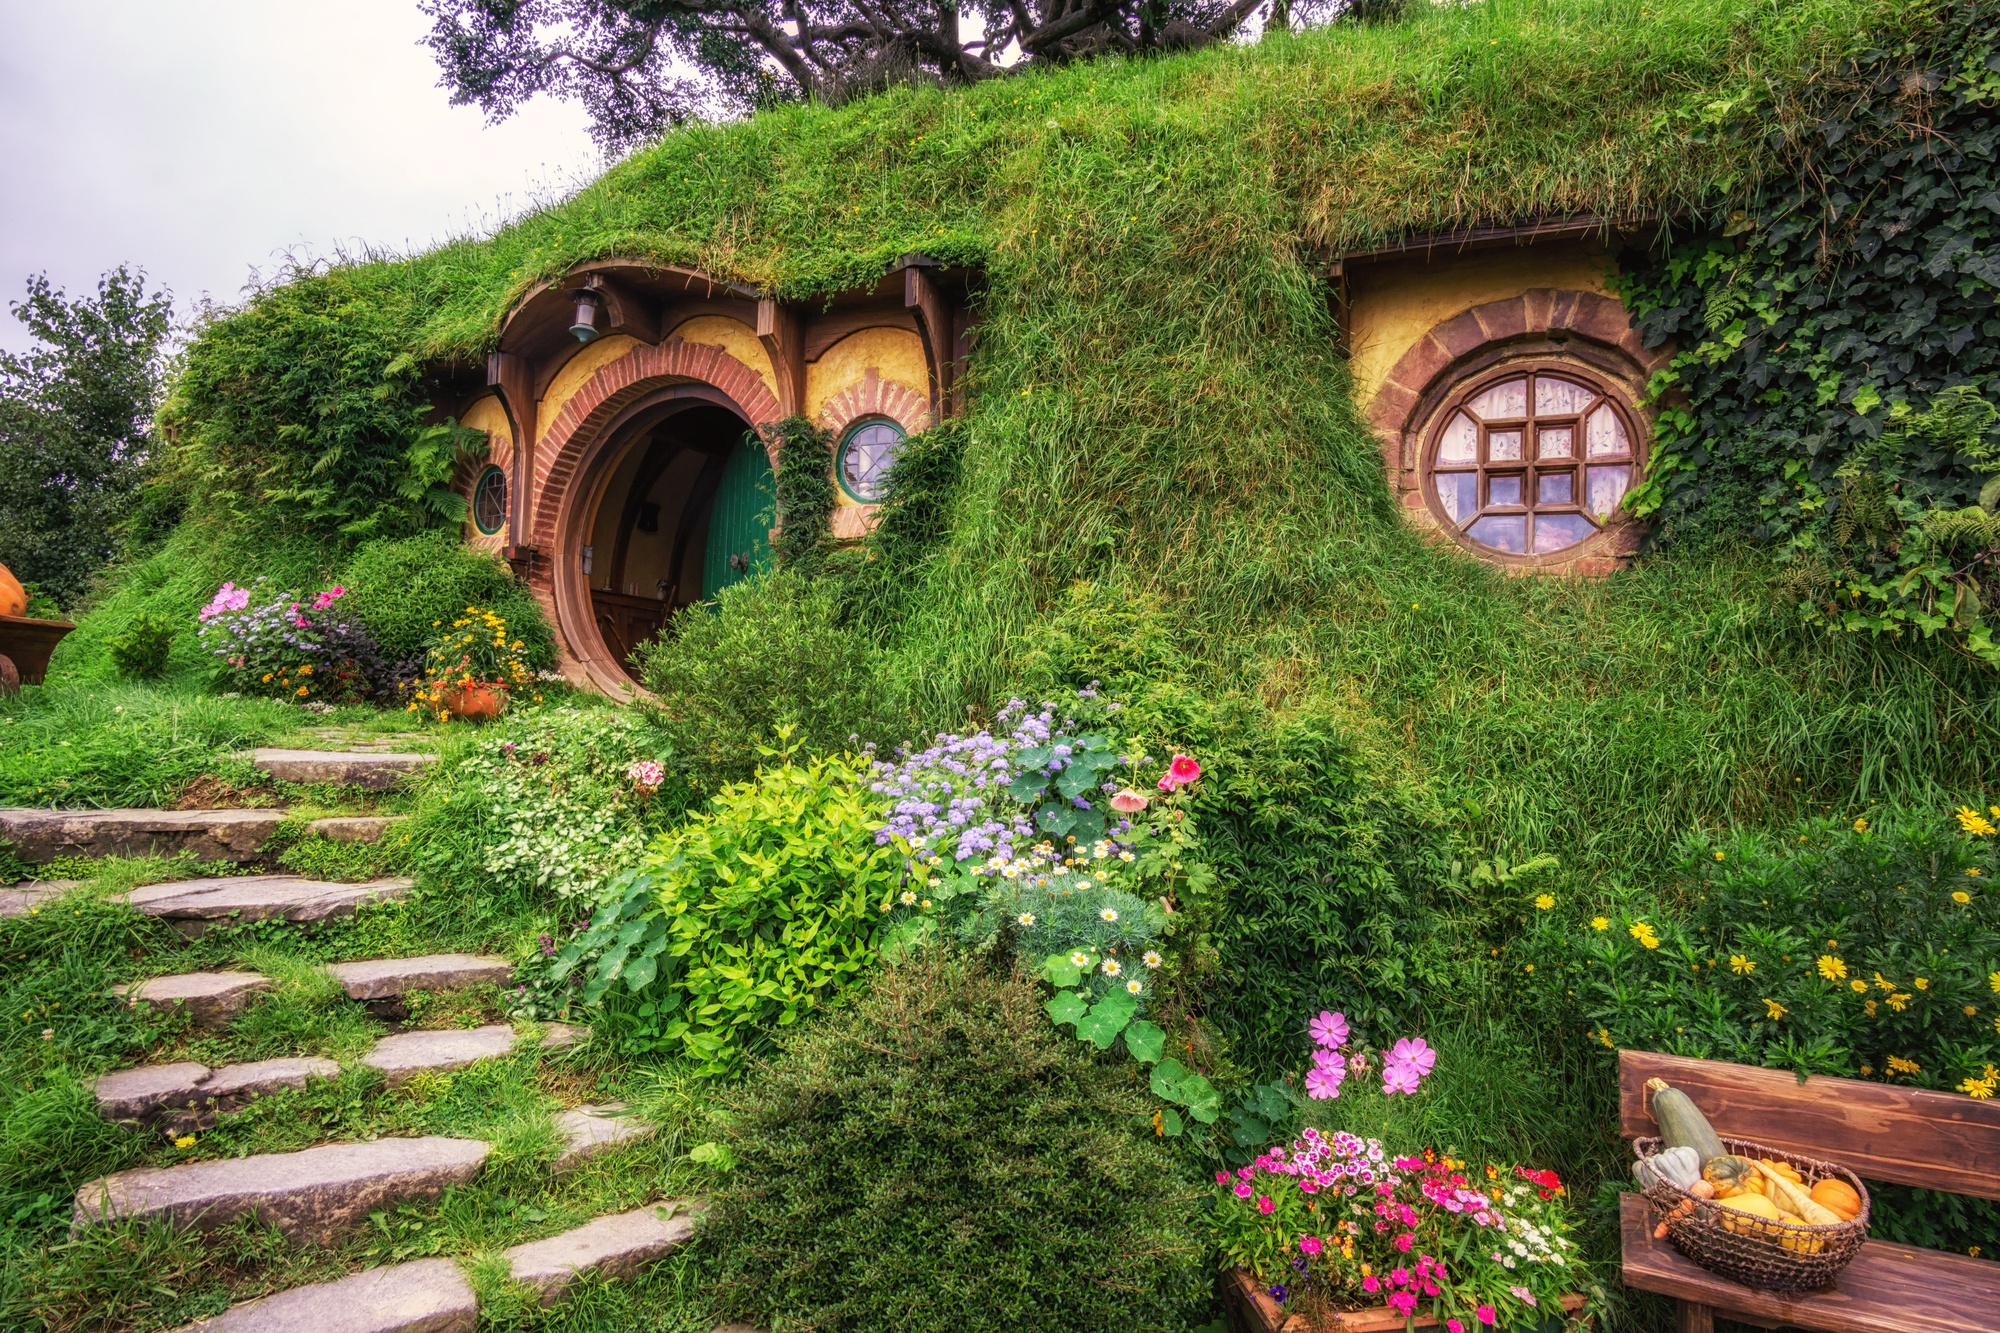 awesome movie locations, Hobbiton, the Shire, The Lord of the Rings, Matamata, New Zealand